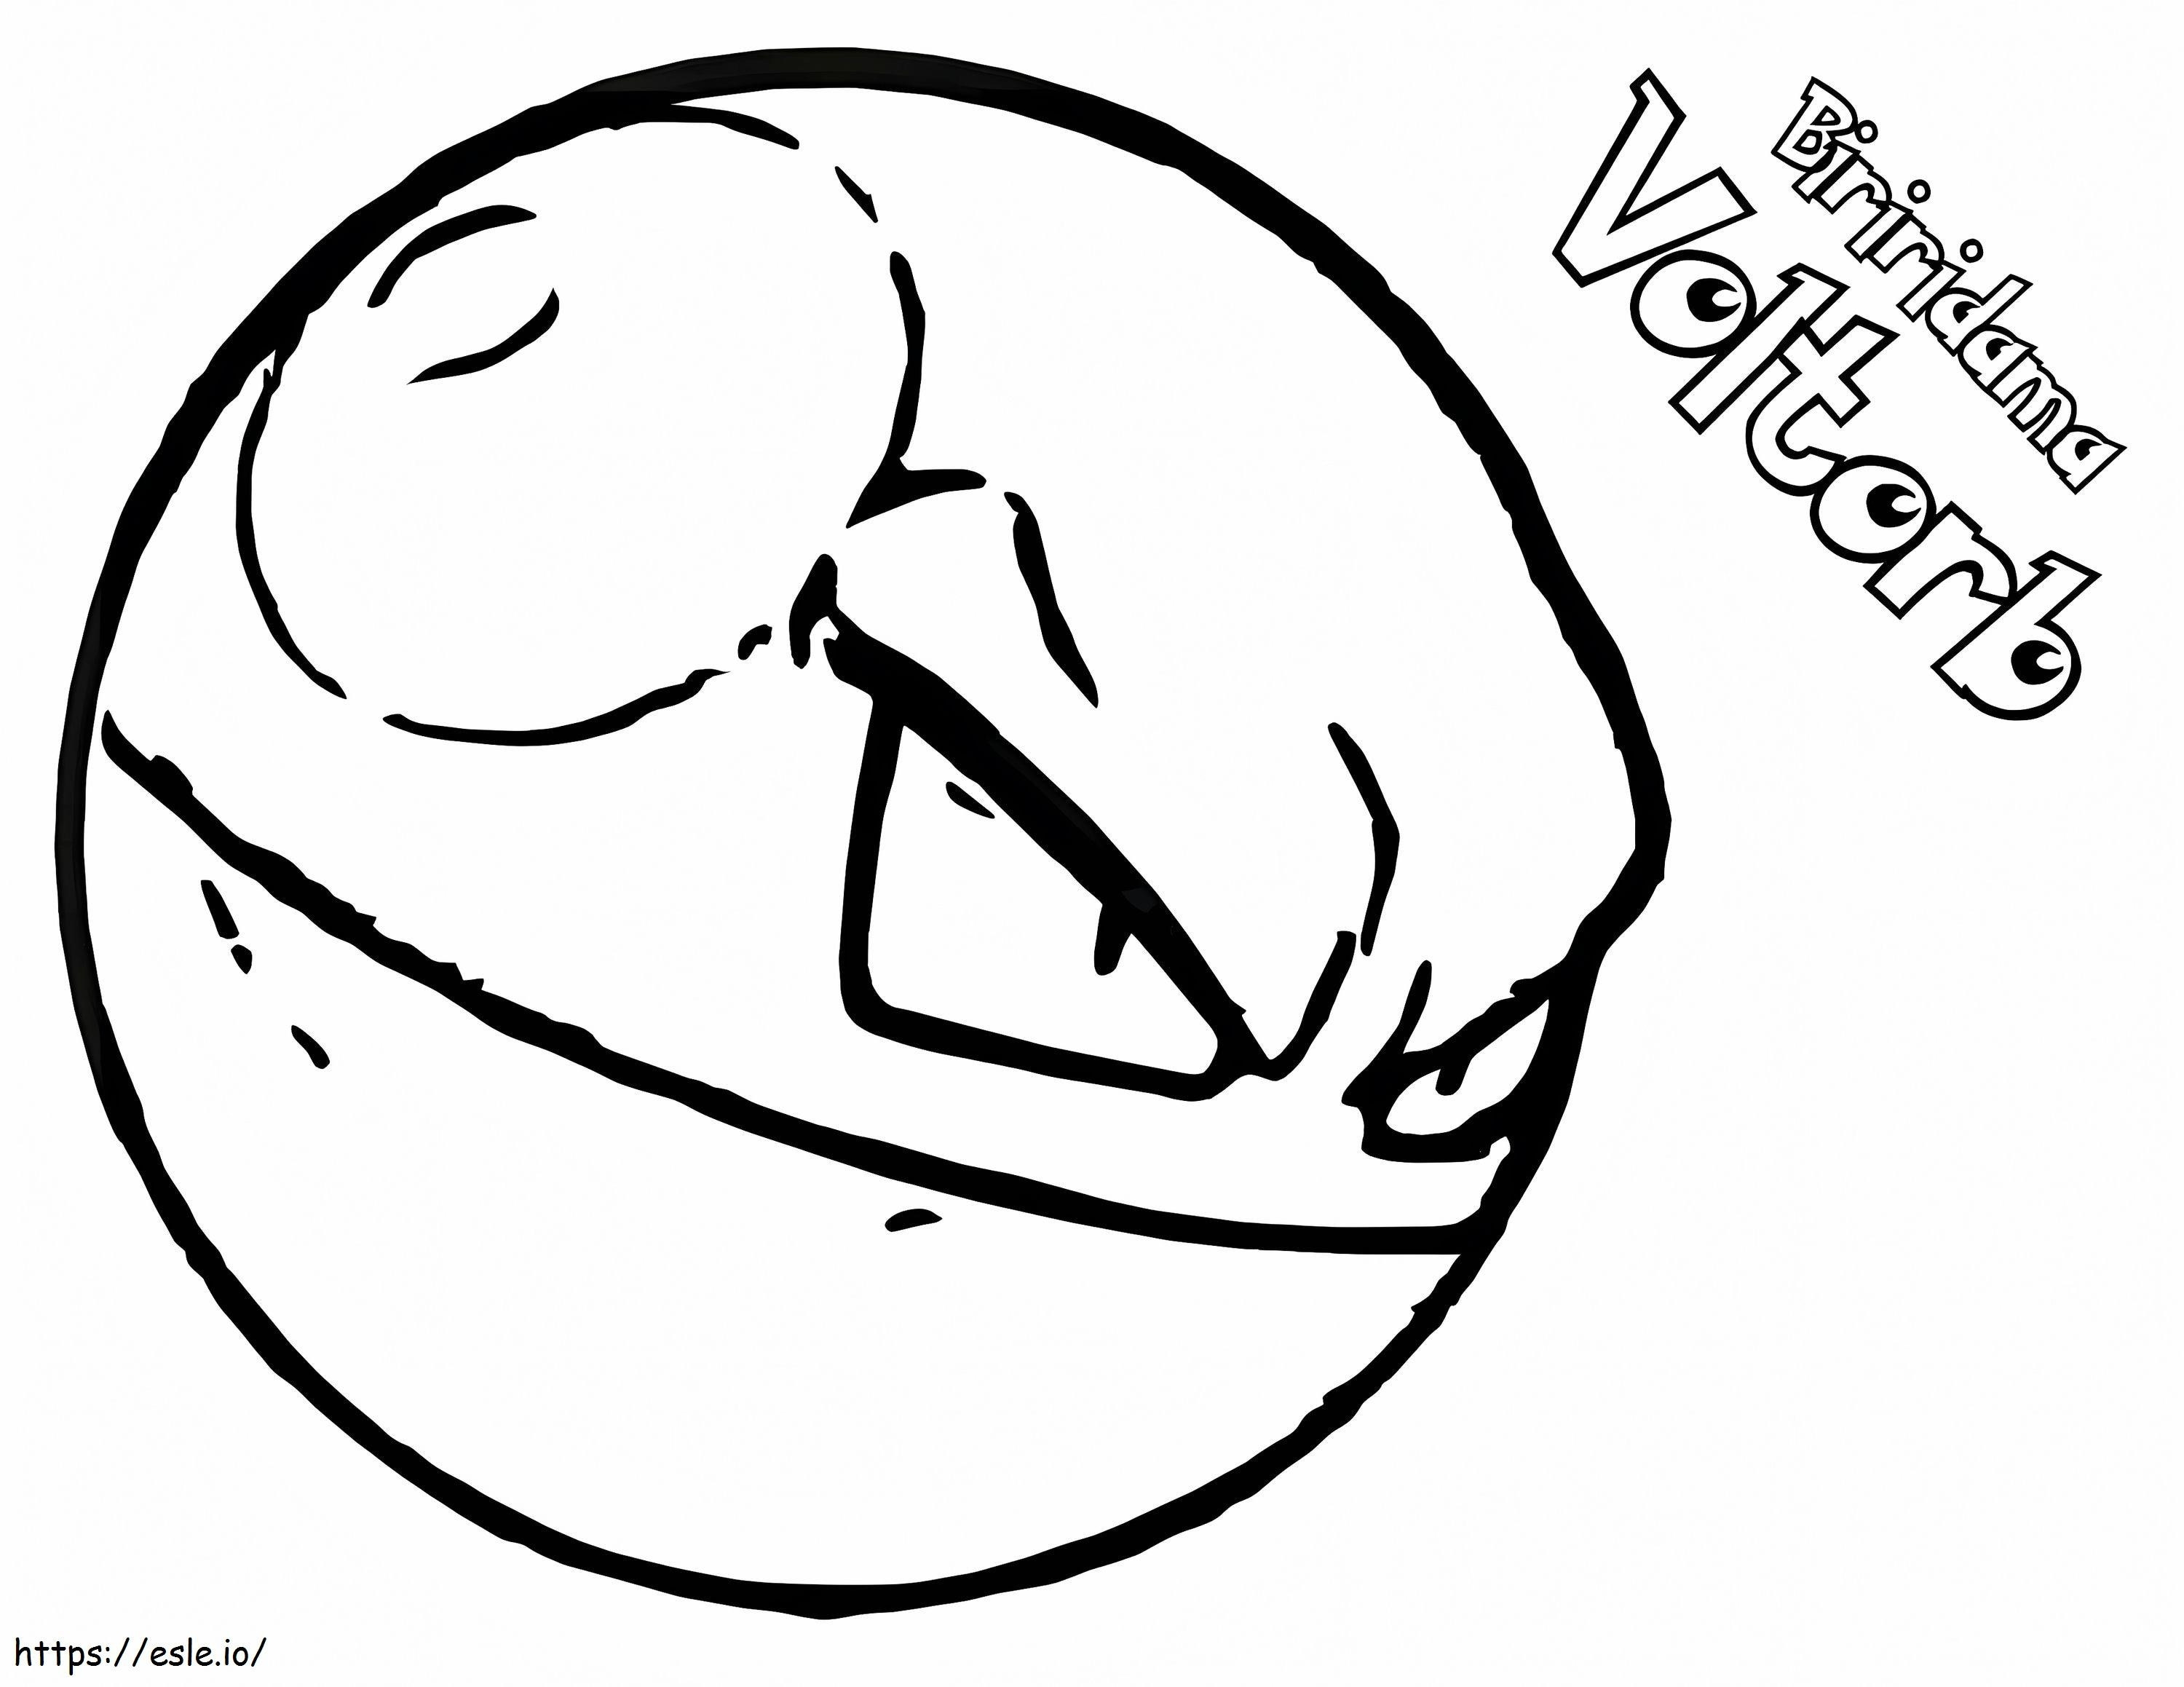 Voltorb 2 coloring page